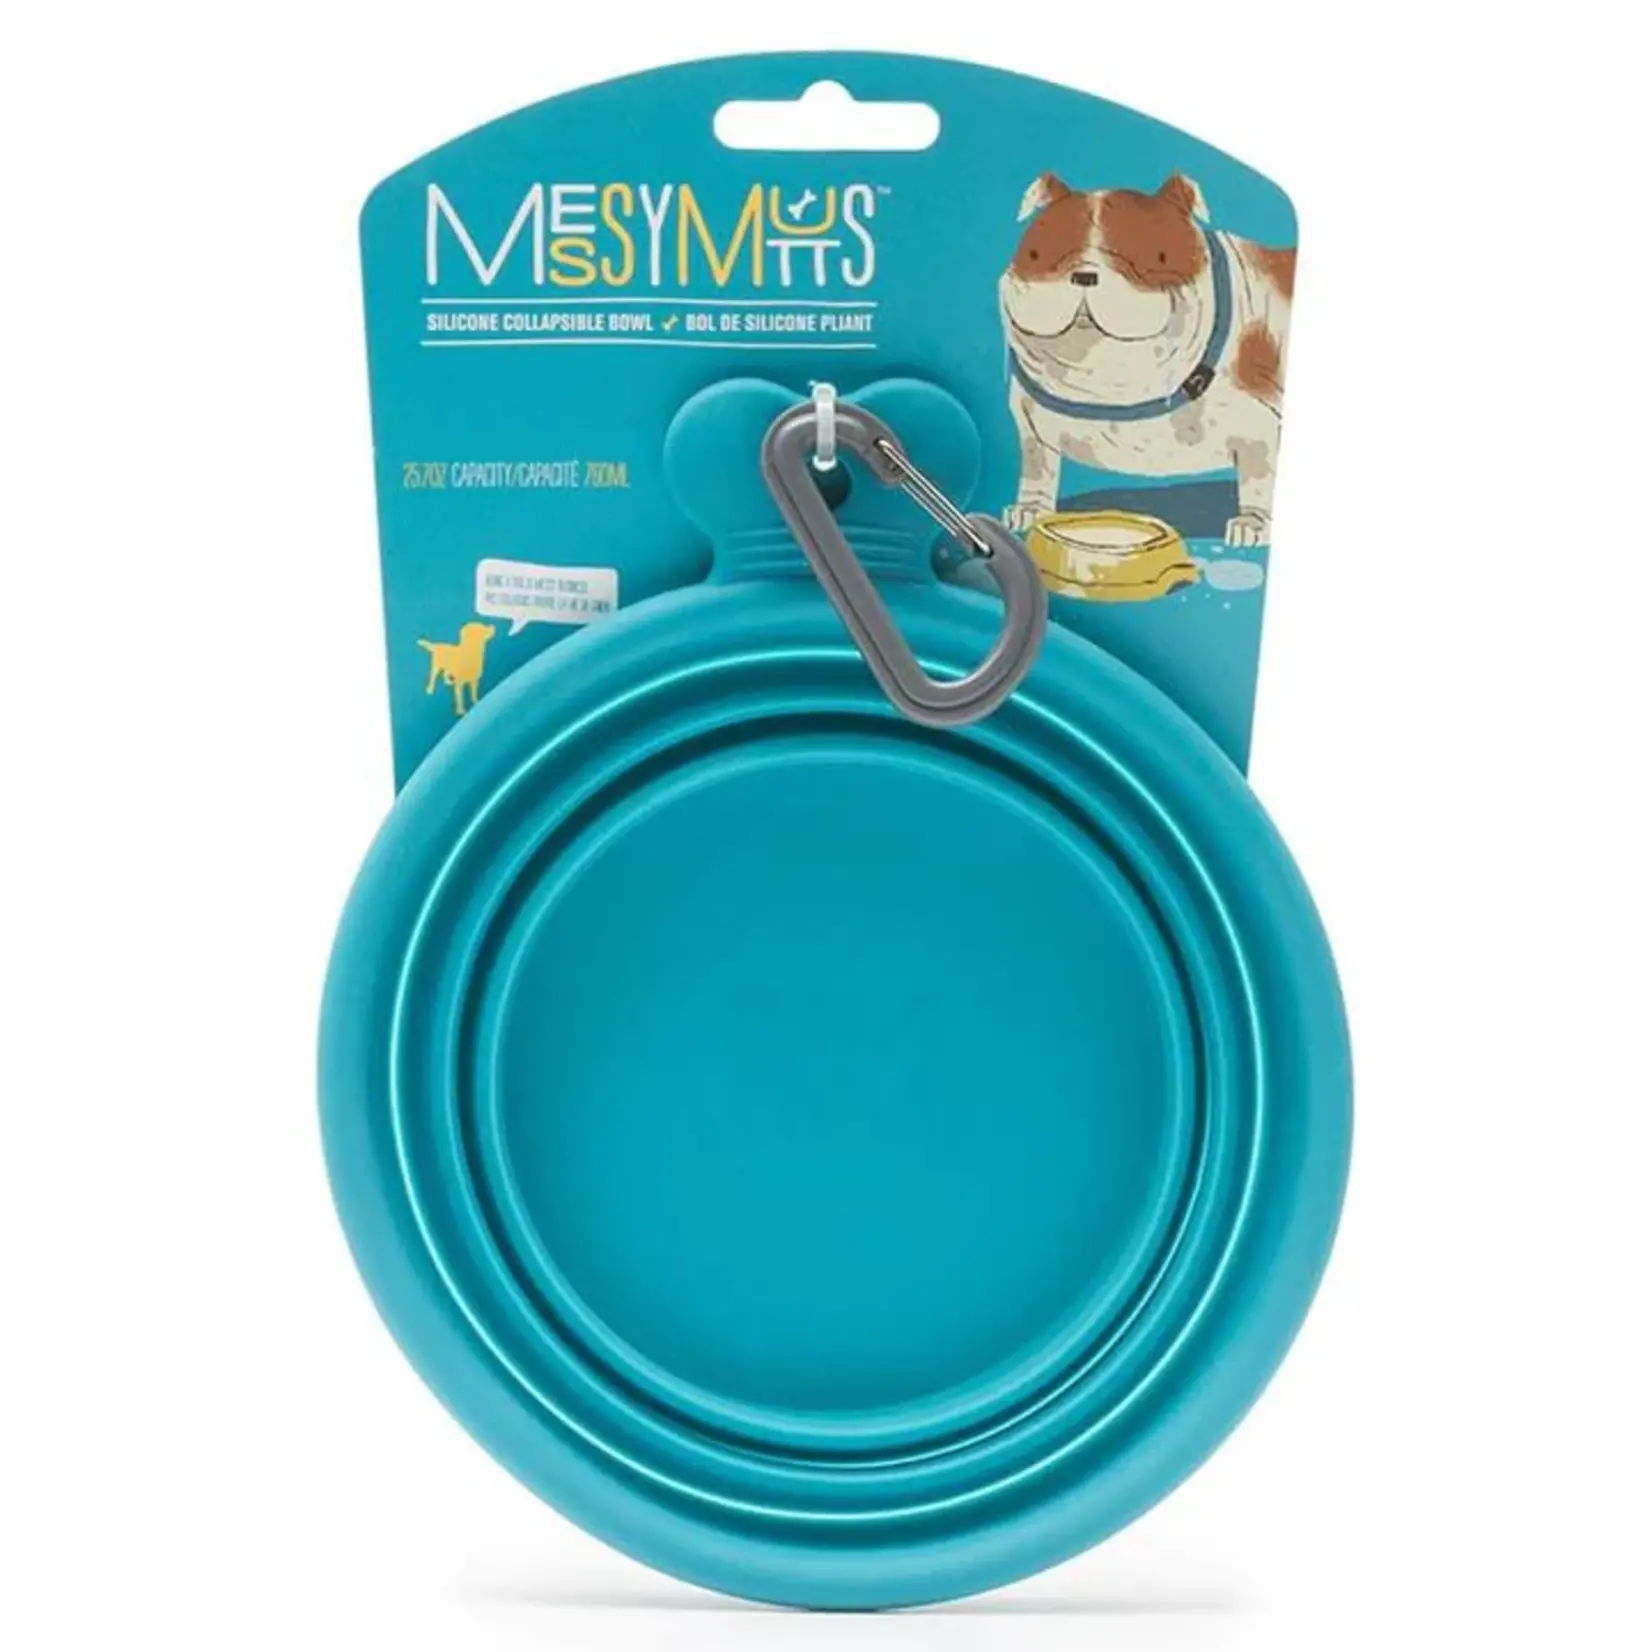 Messy Mutts Silicone Collapsible Bowl Blue (1.75 cup capacity)